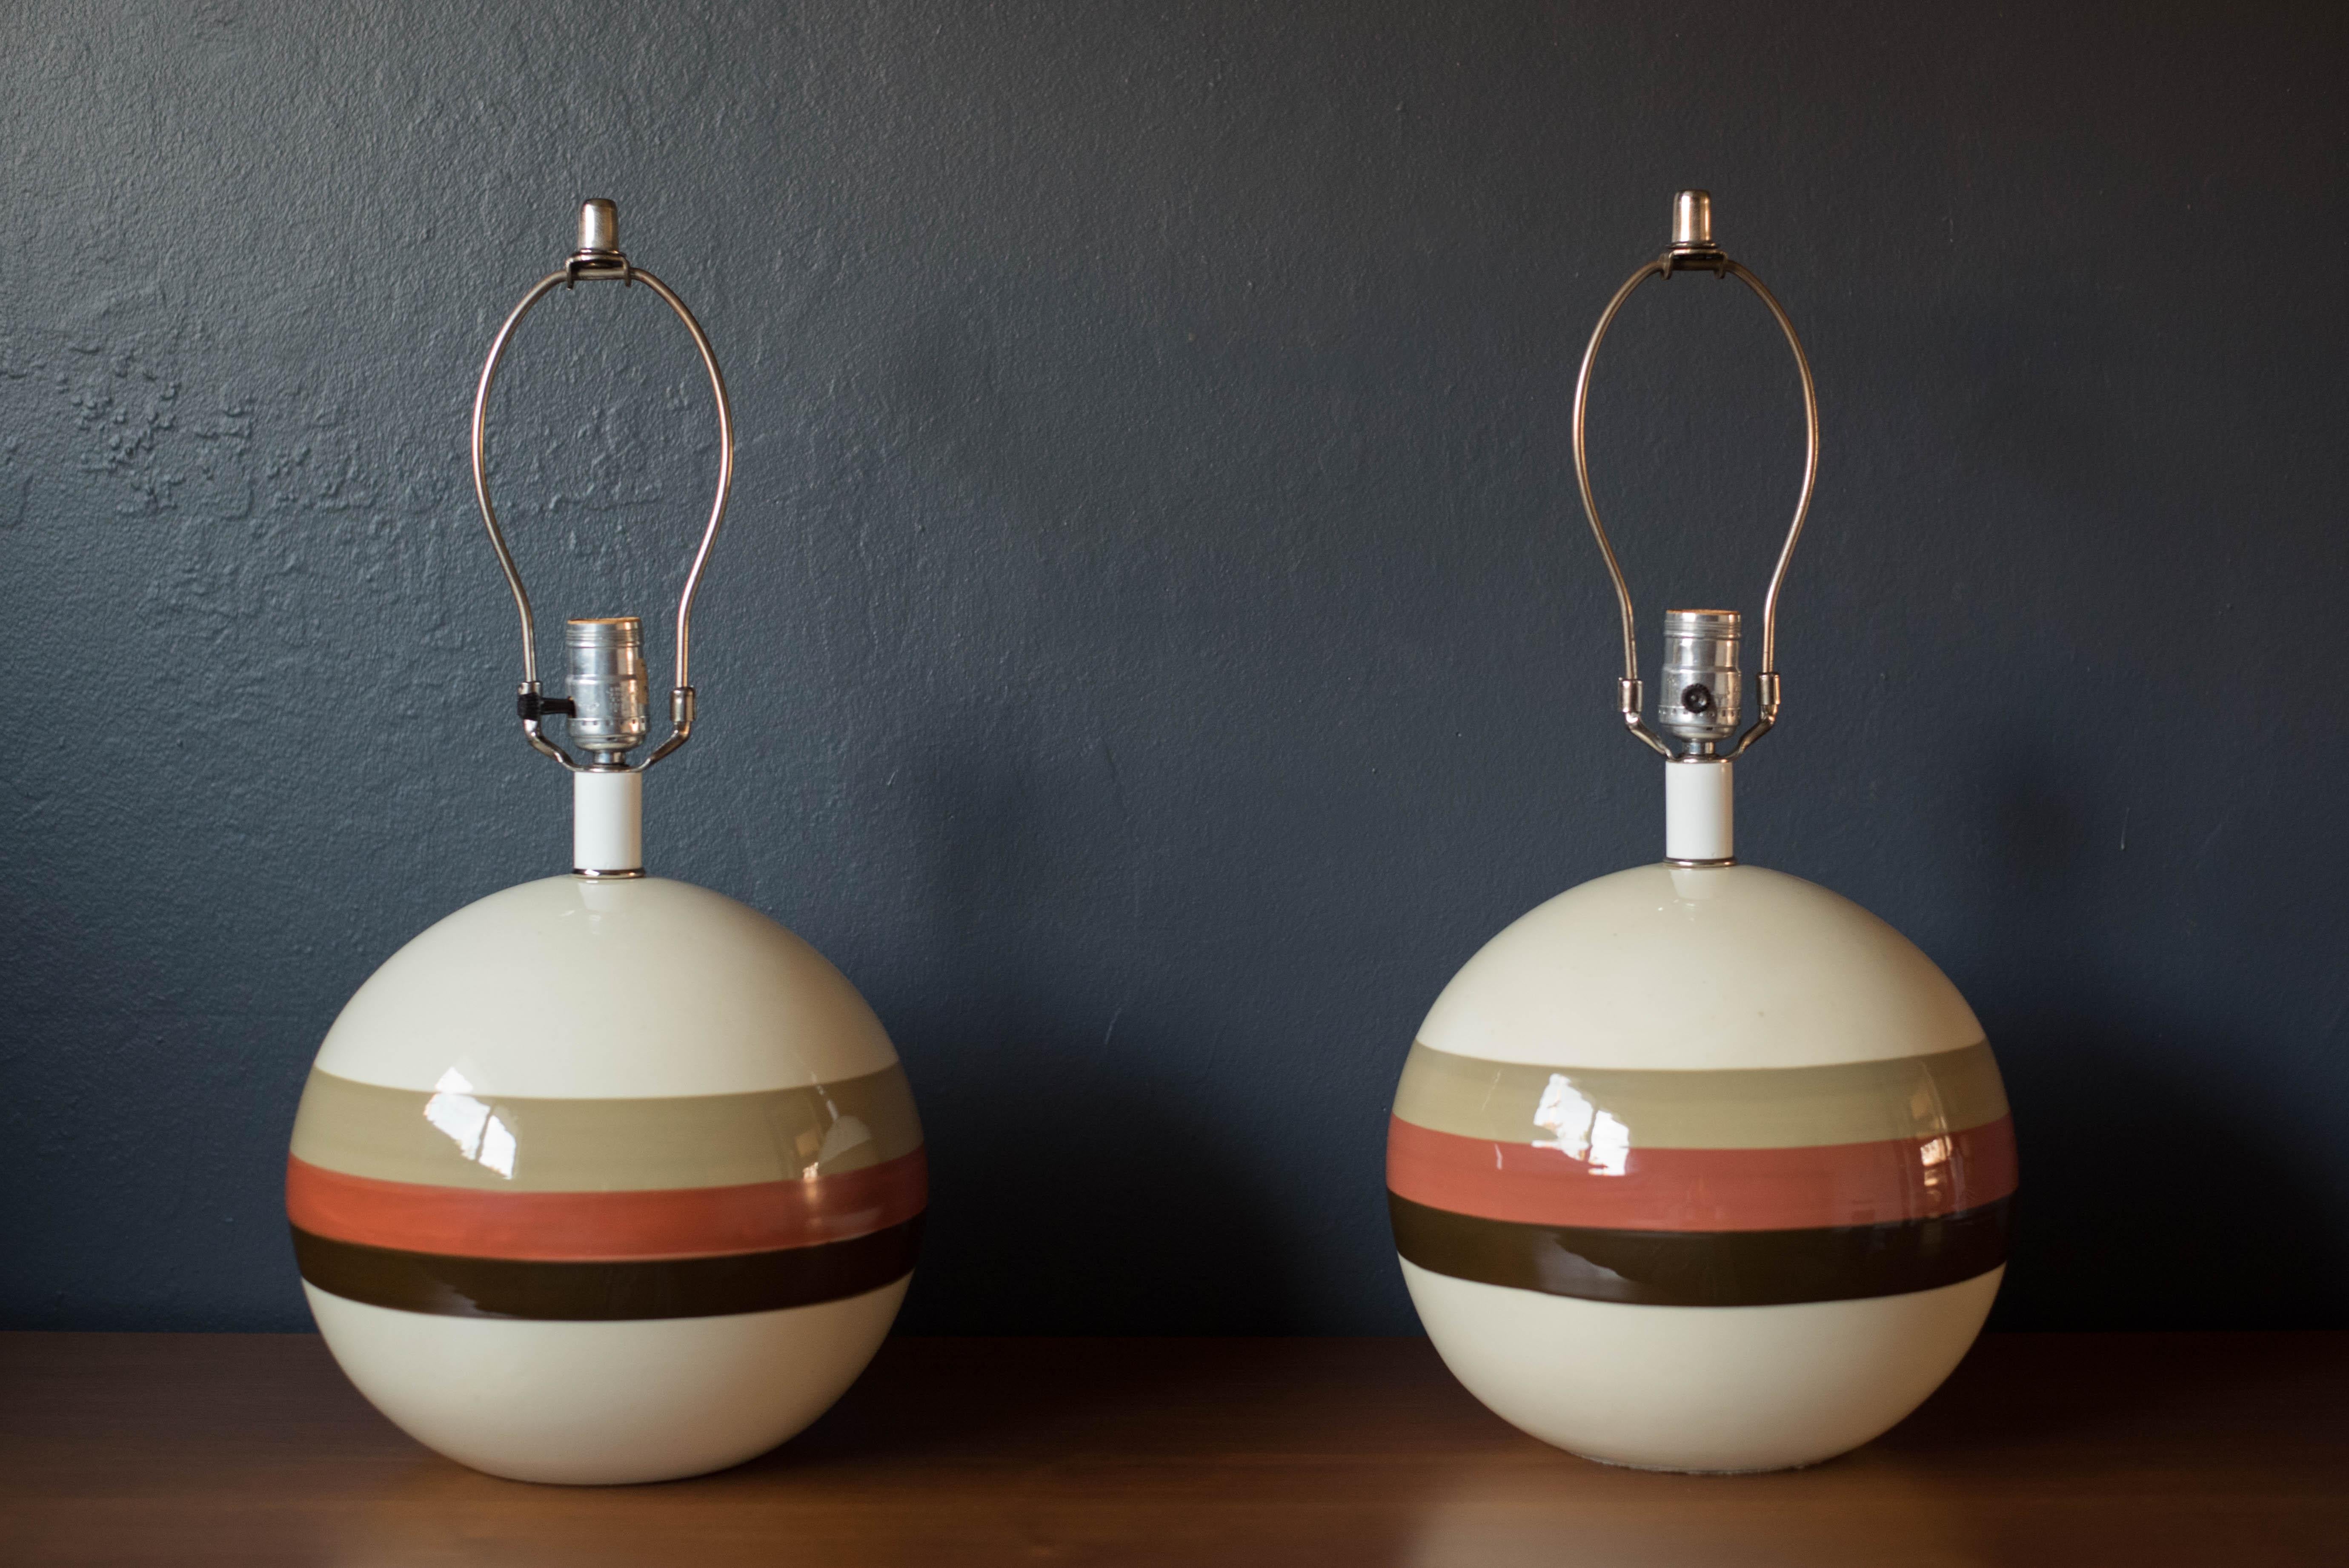 Mid century round pair of ceramic pottery lamps circa 1970's. This unique set features a natural earth tone monochromatic palette in a gloss finish. Pairs well with a drum or cone shaped shade for a mid century modern or bohemian interior style.